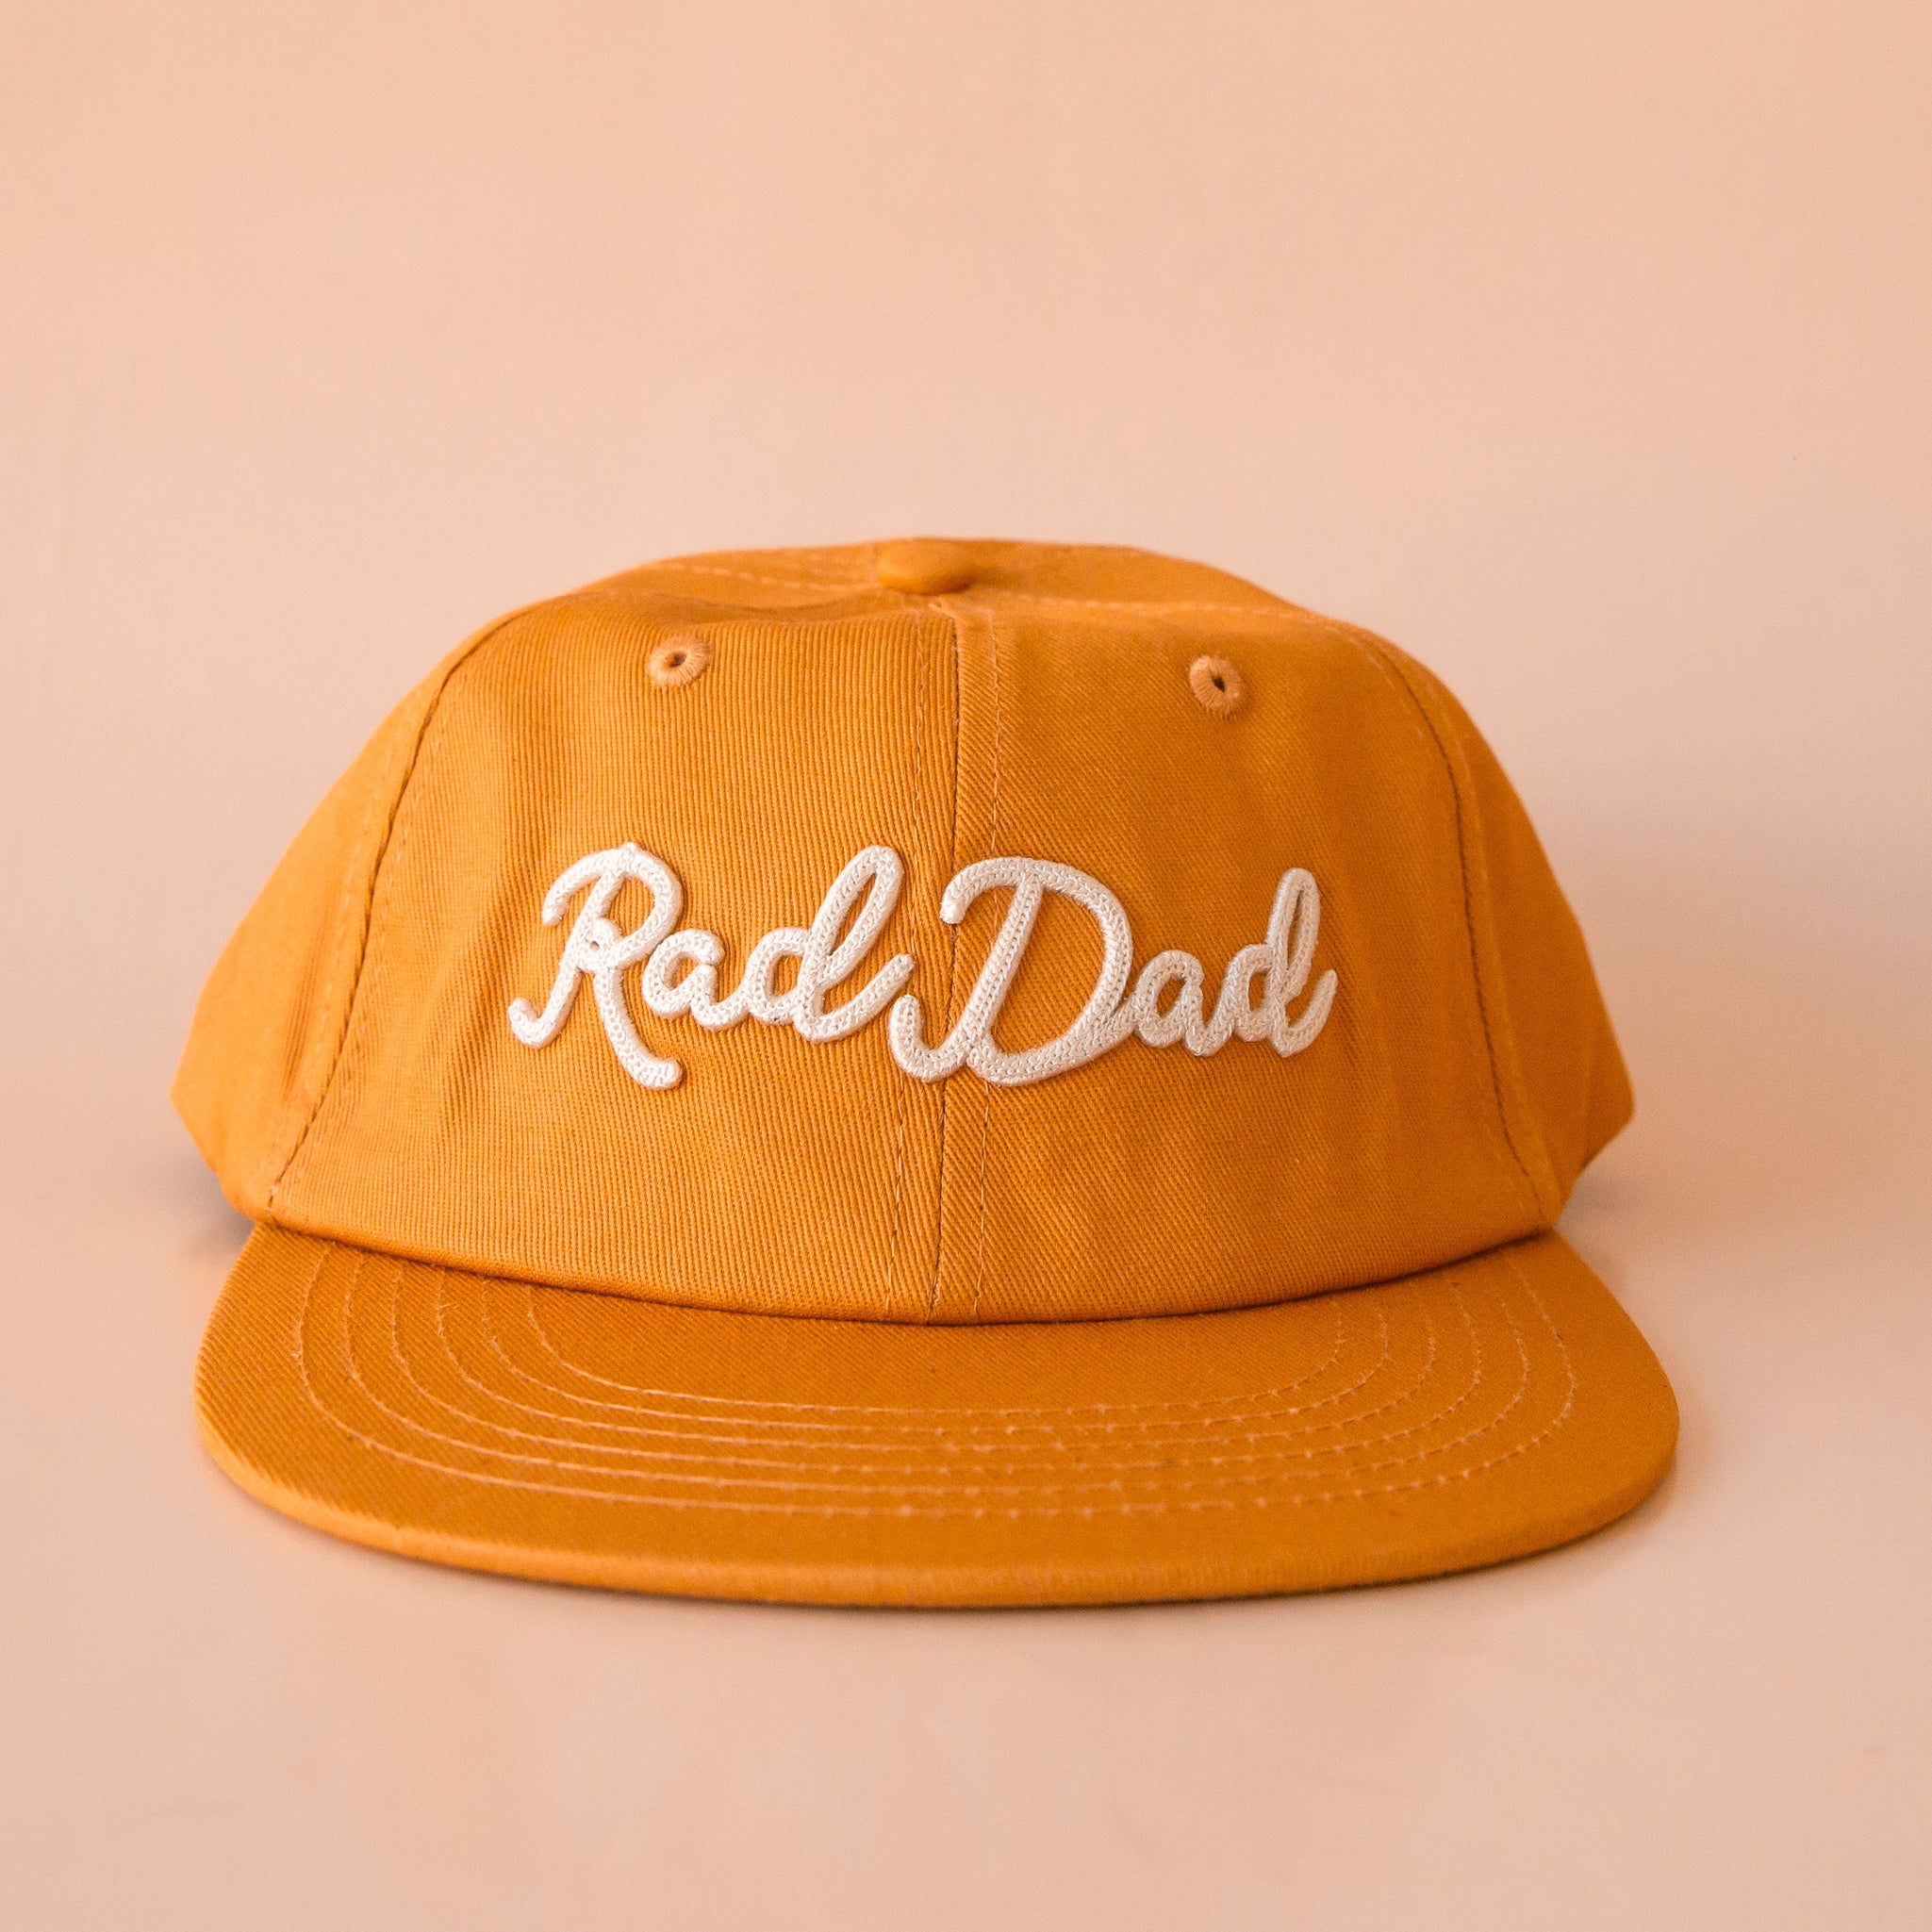 A flat brimmed burnt orange had with white embroidering that reads, "Rad Dad".